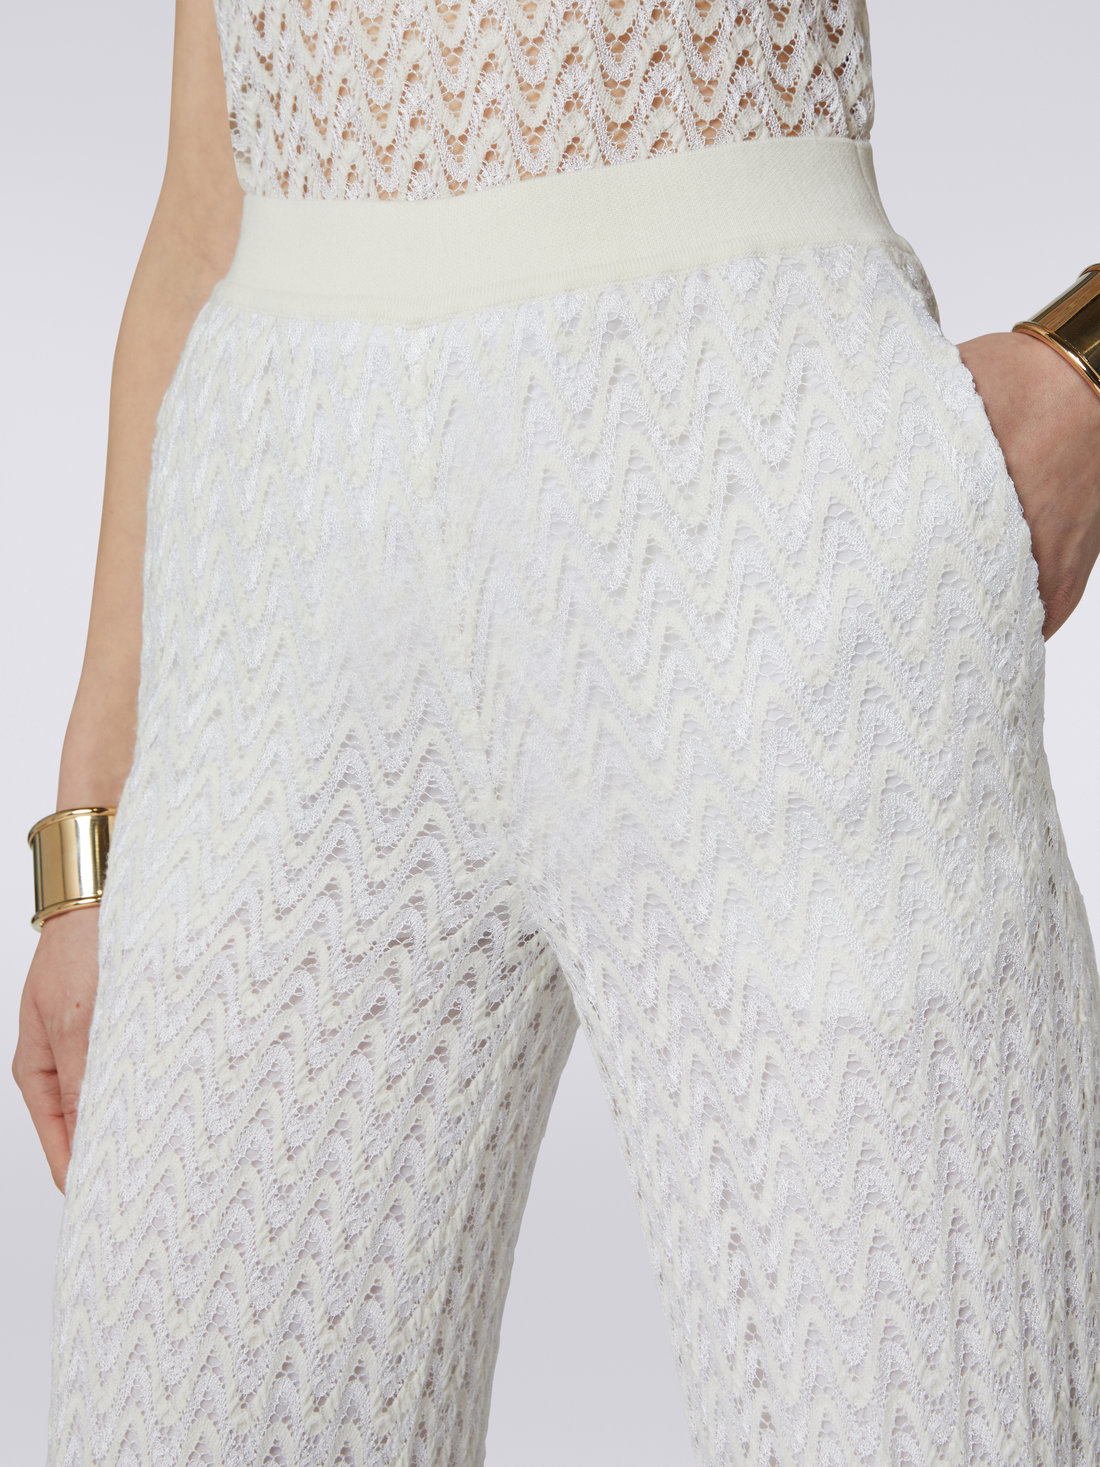 Palazzo pants in raschel knit wool and viscose, White  - DS23WI0WBR00NU14001 - 4